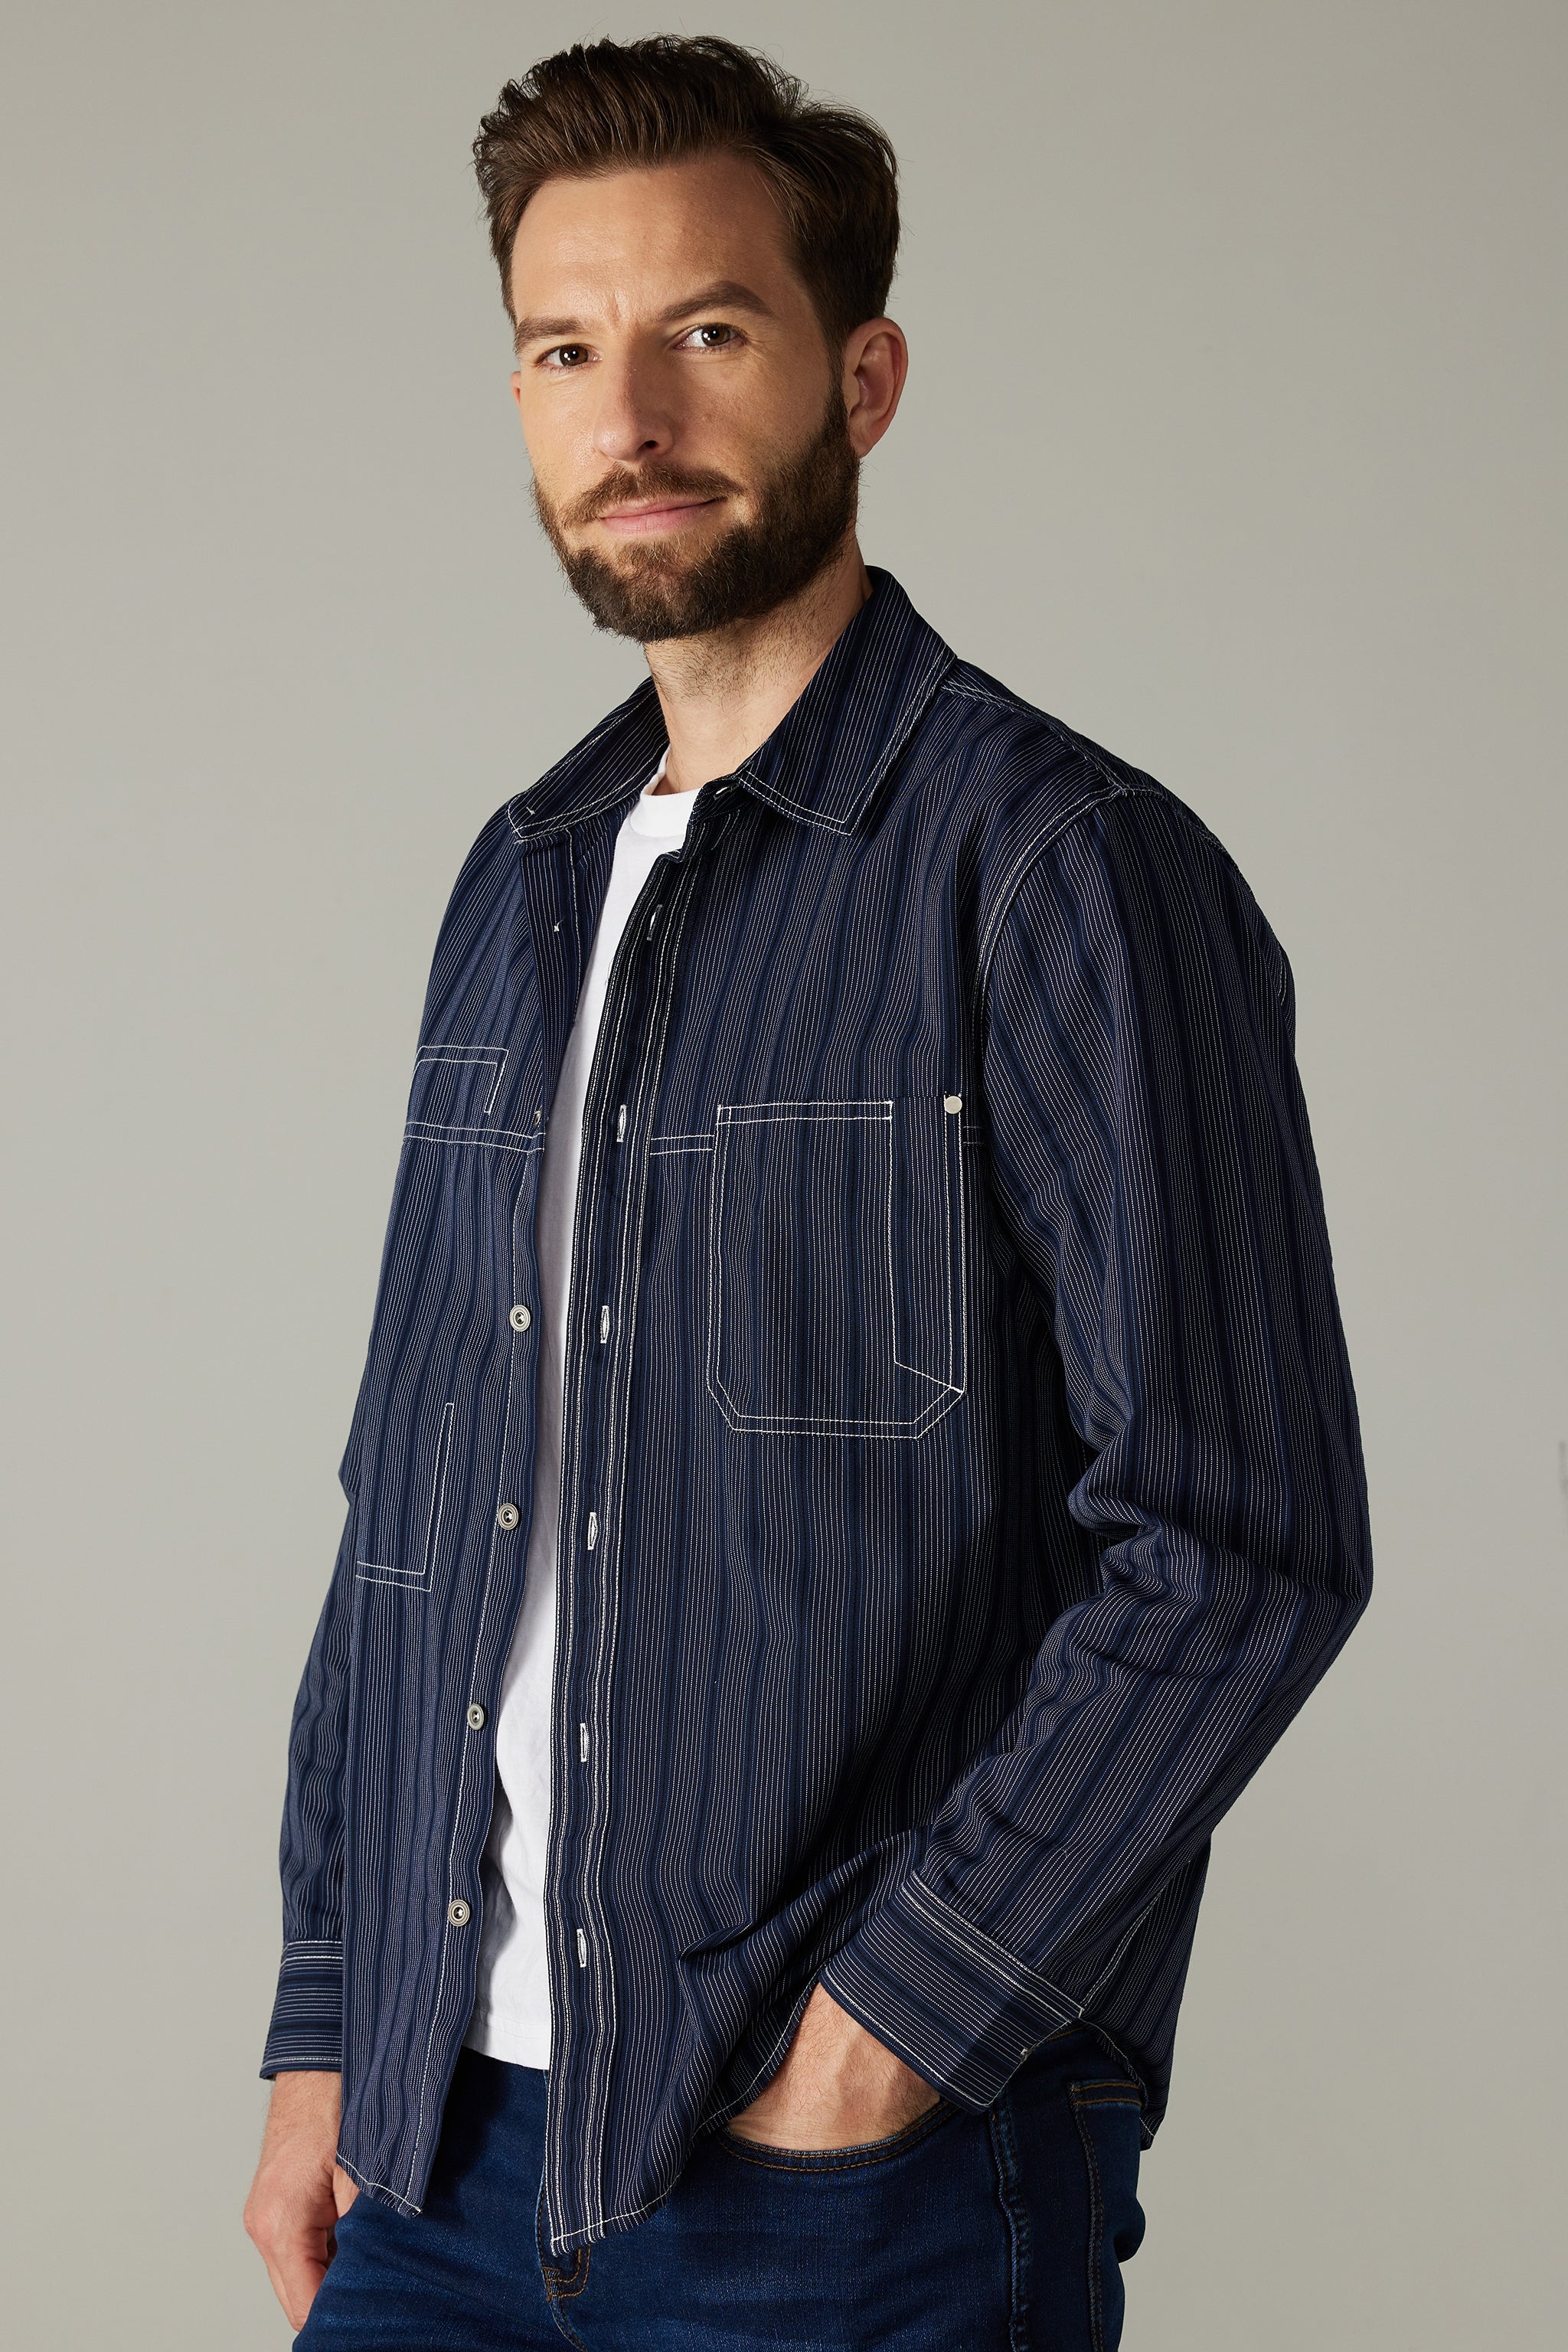 a man with a beard wearing a shirt and jeans